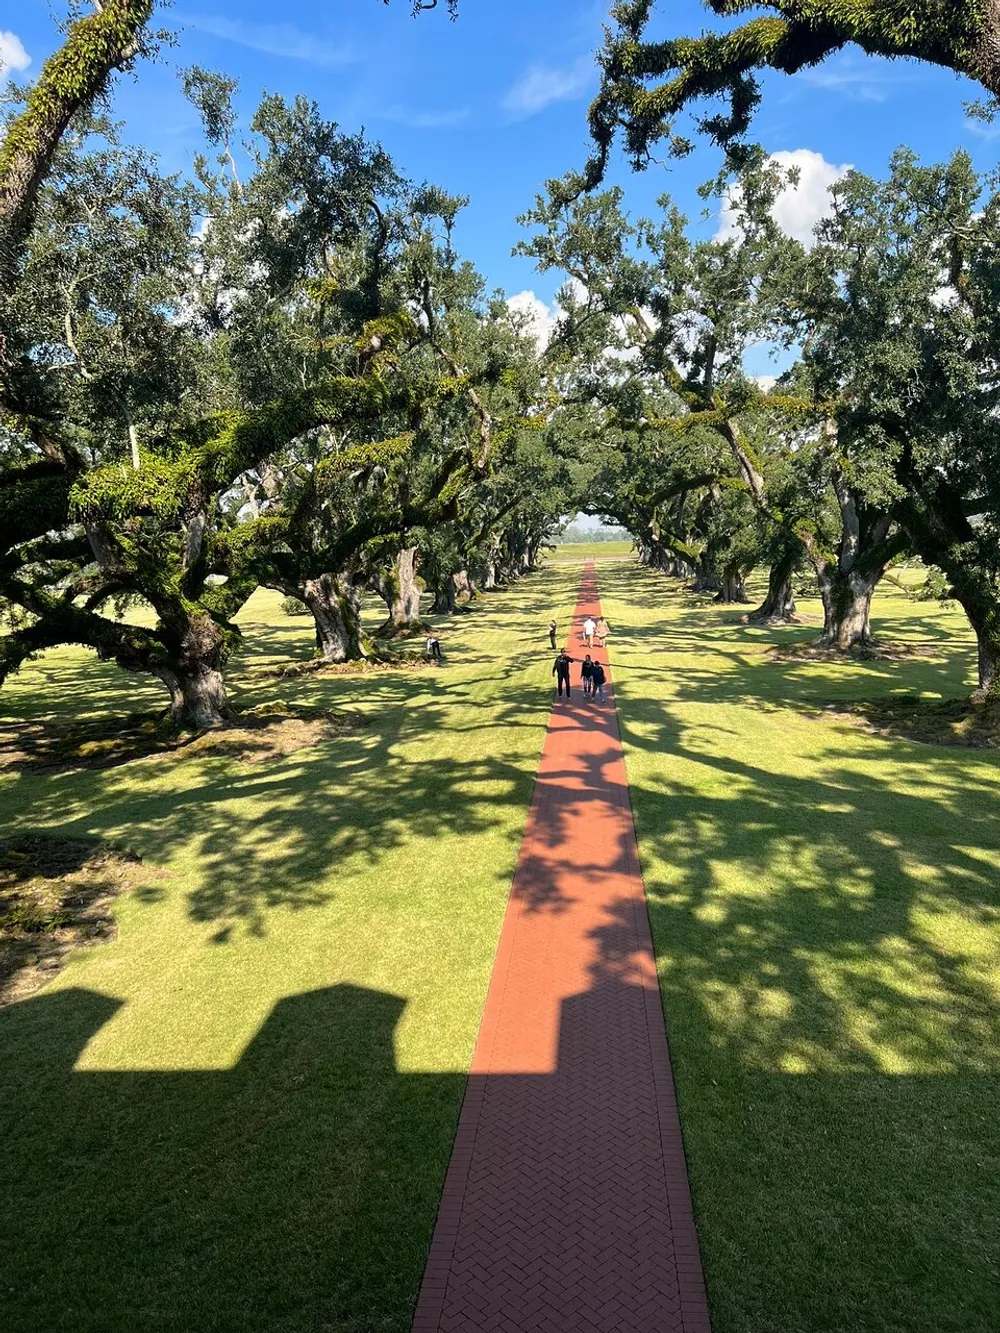 This image features a scenic view of a long brick pathway flanked by majestic oak trees with people walking down the path and the sunlight casting dappled shadows across the verdant grass